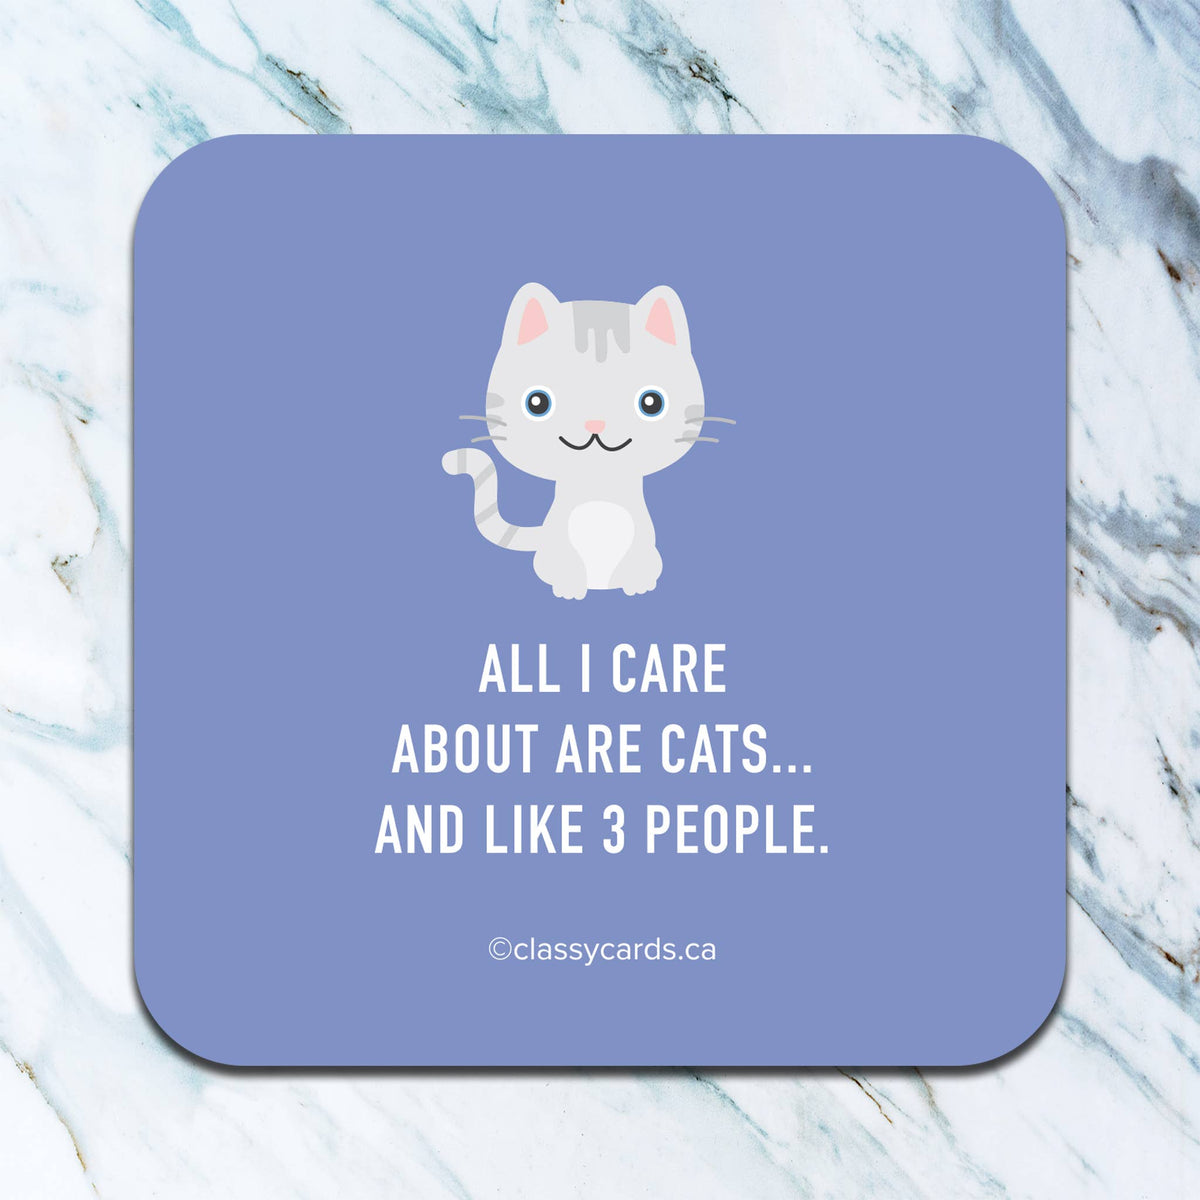 All I Care About is Cats Coaster